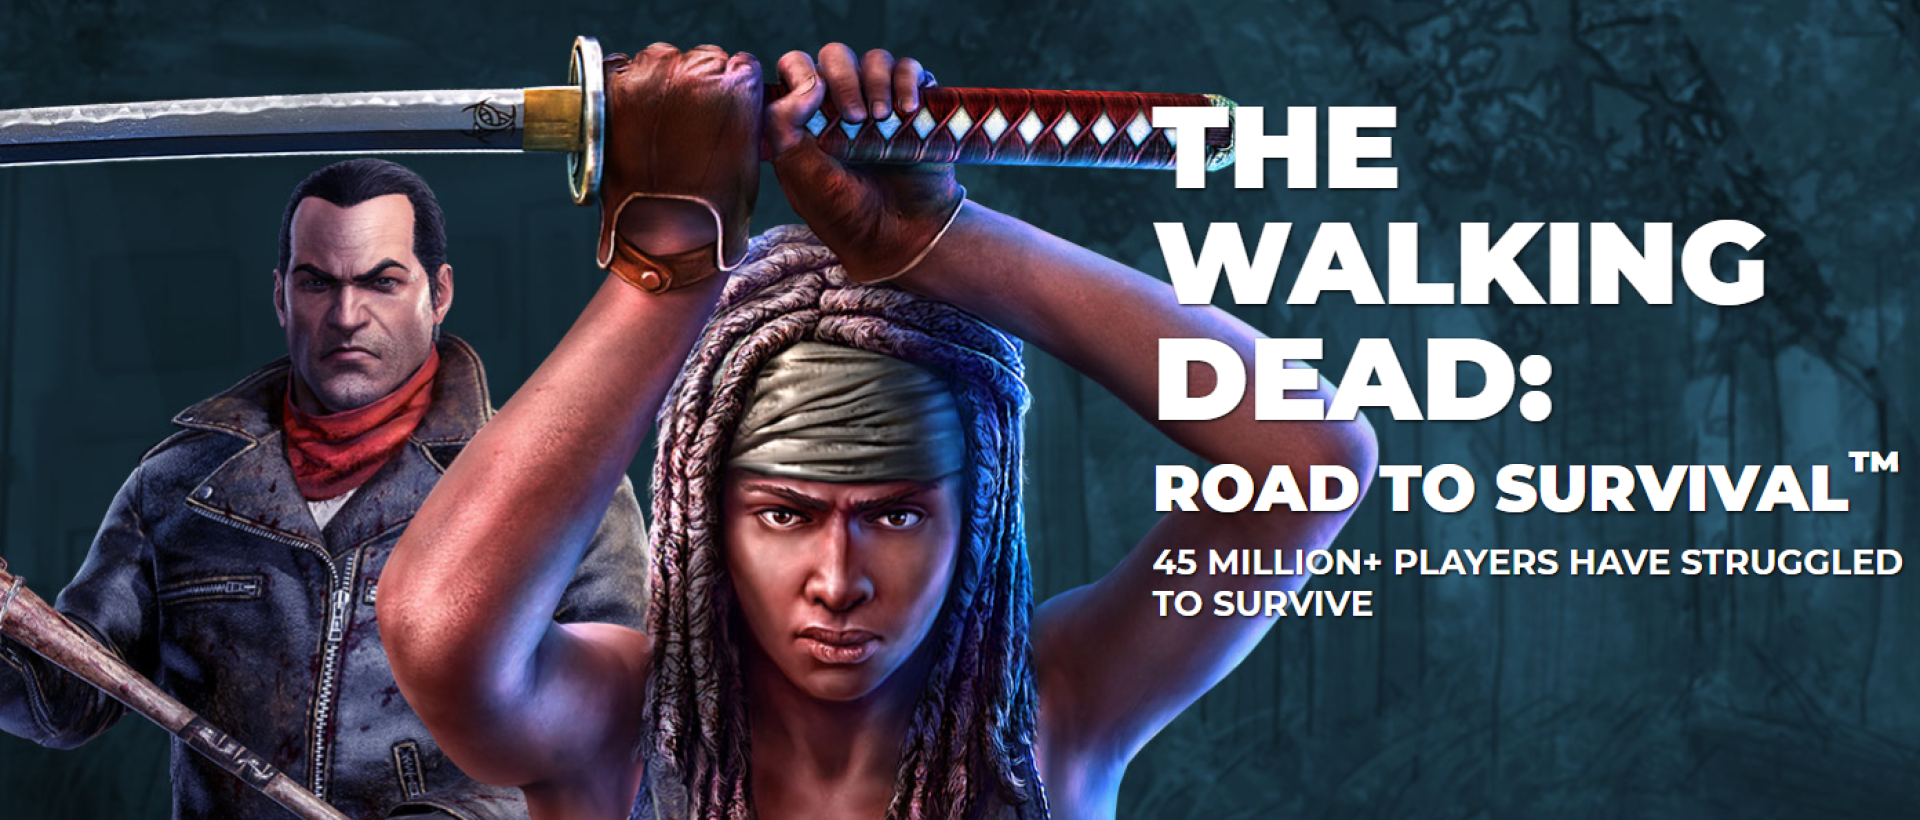 download the road to survival walking dead for free